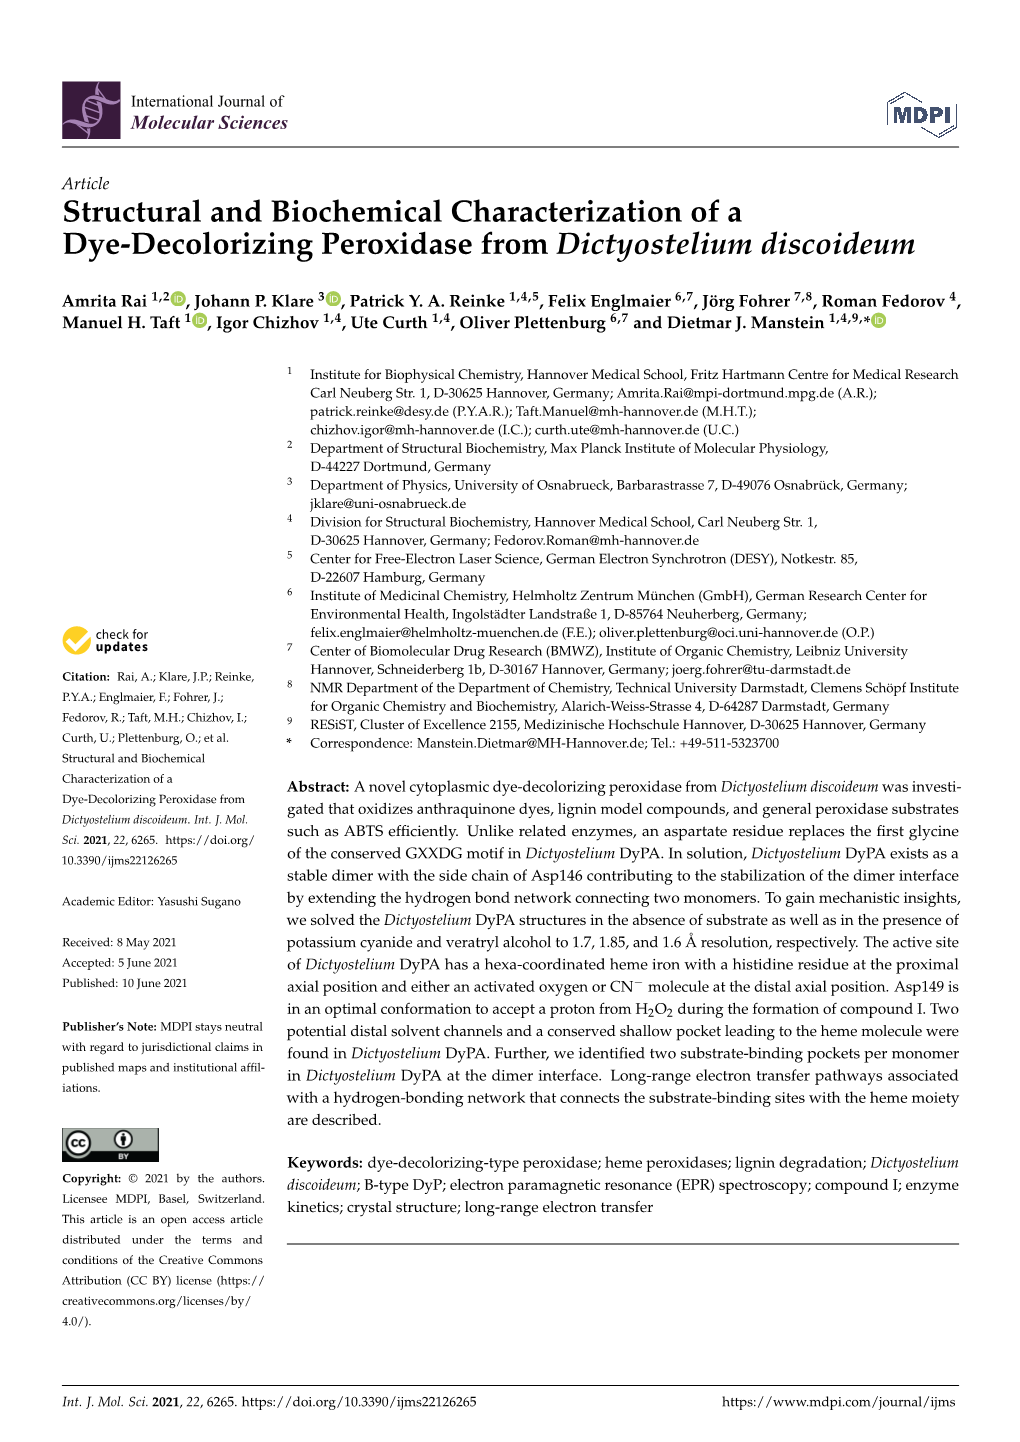 Structural and Biochemical Characterization of a Dye-Decolorizing Peroxidase from Dictyostelium Discoideum